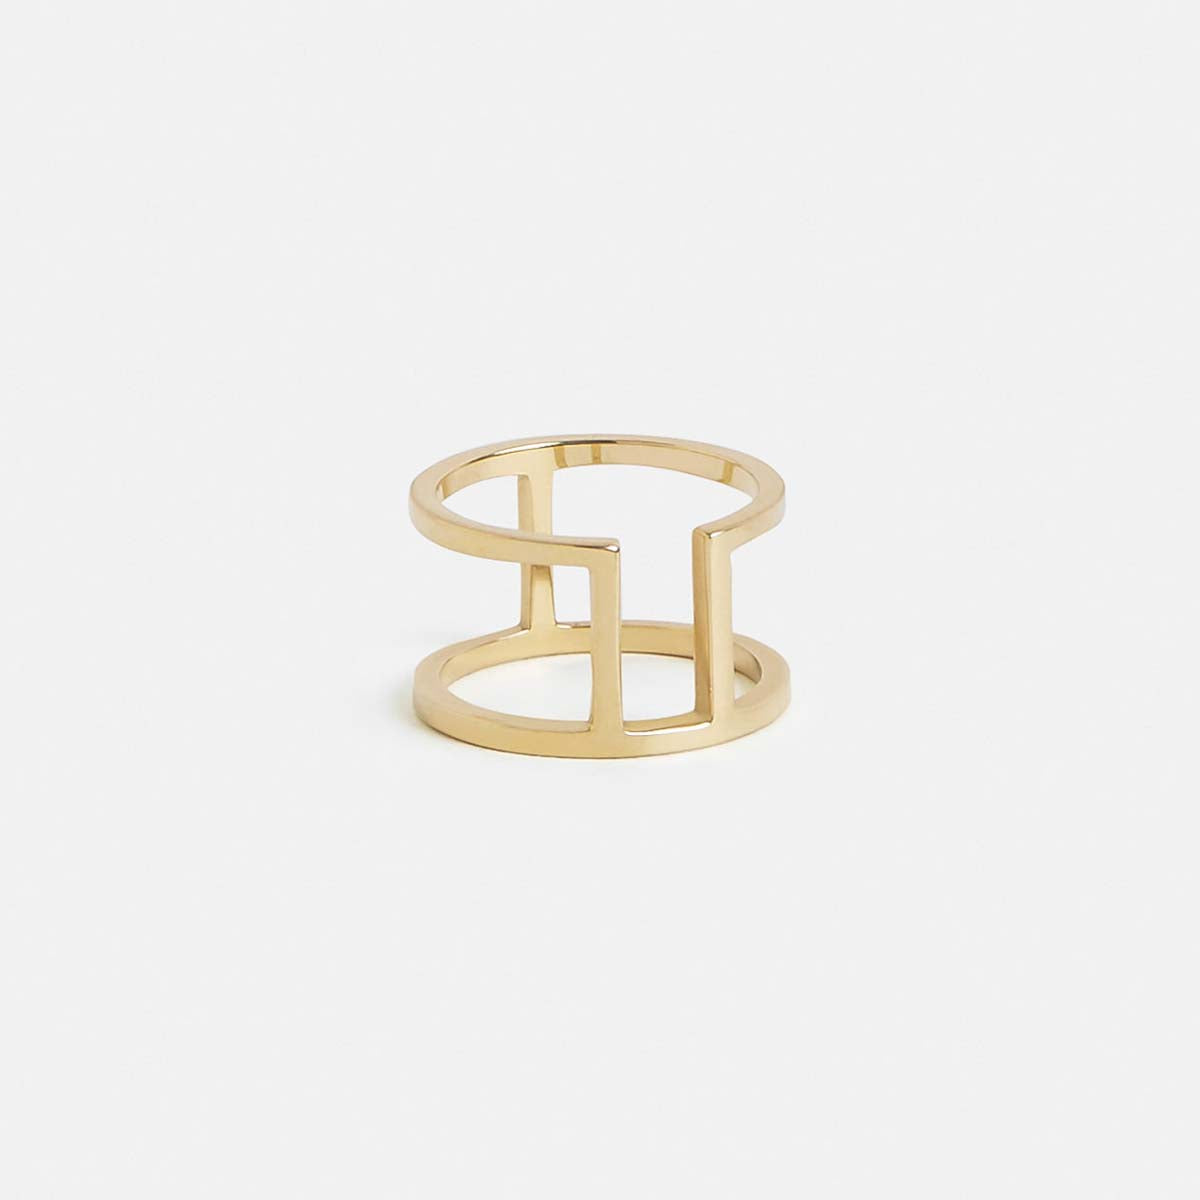 Cote Unisex Ring in 14k Gold by SHW Fine Jewelry NYC